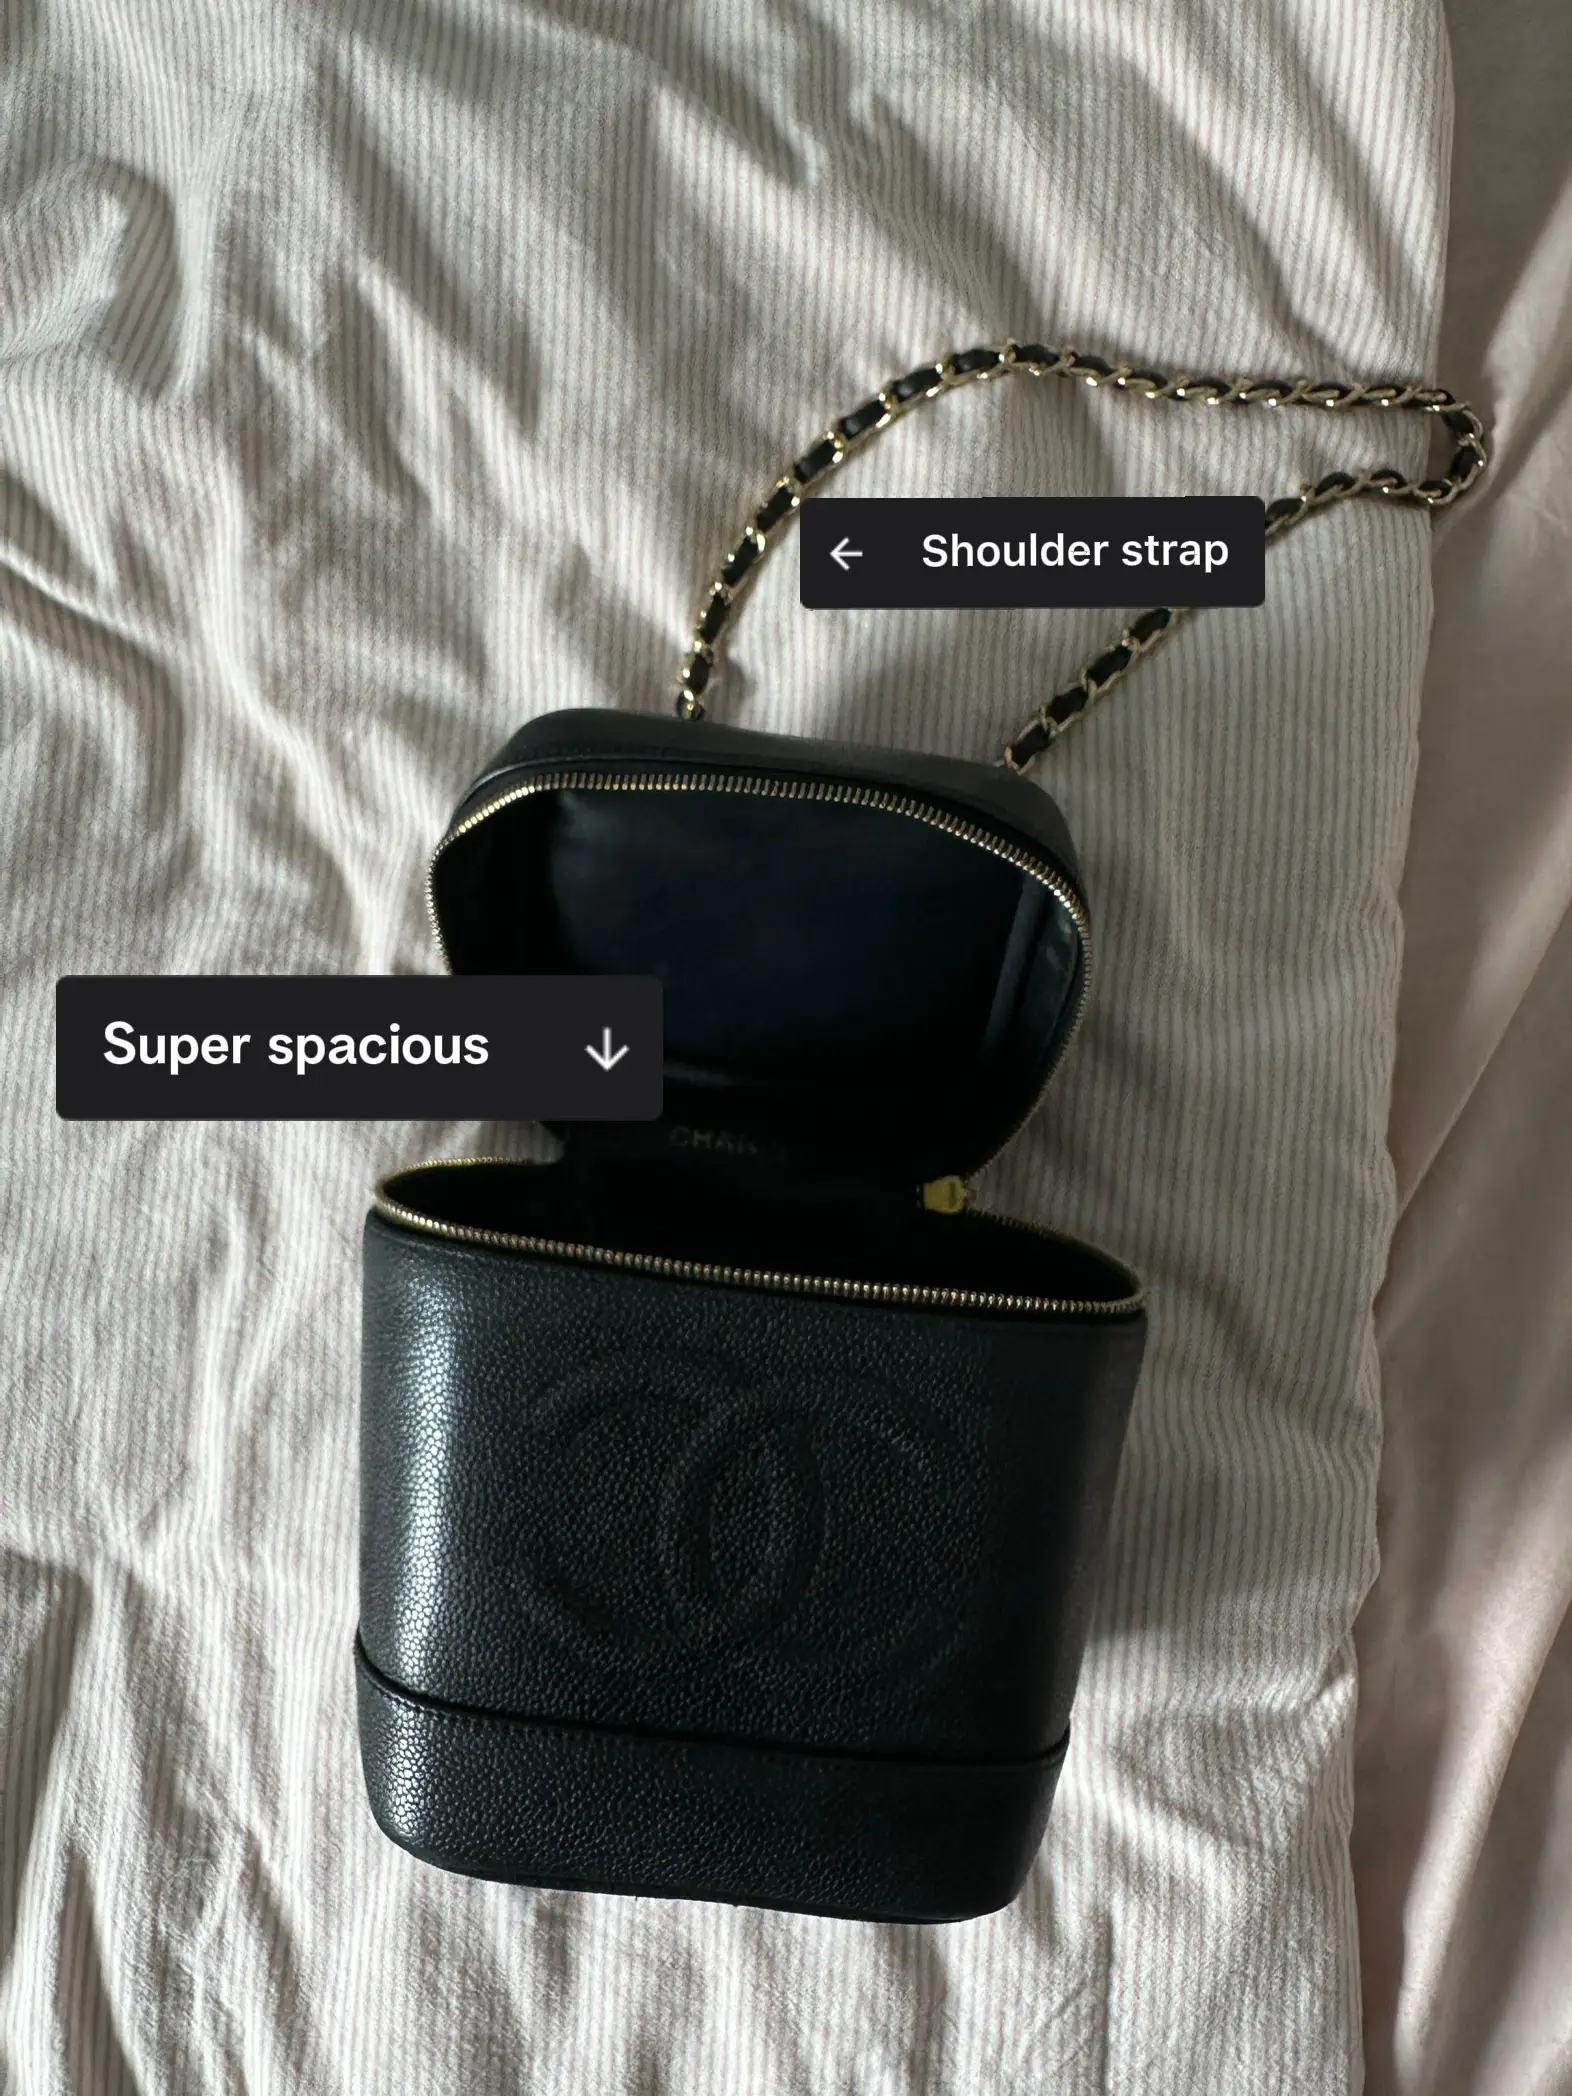 Bag Review] Chanel Vanity, Gallery posted by Helesya Hilda